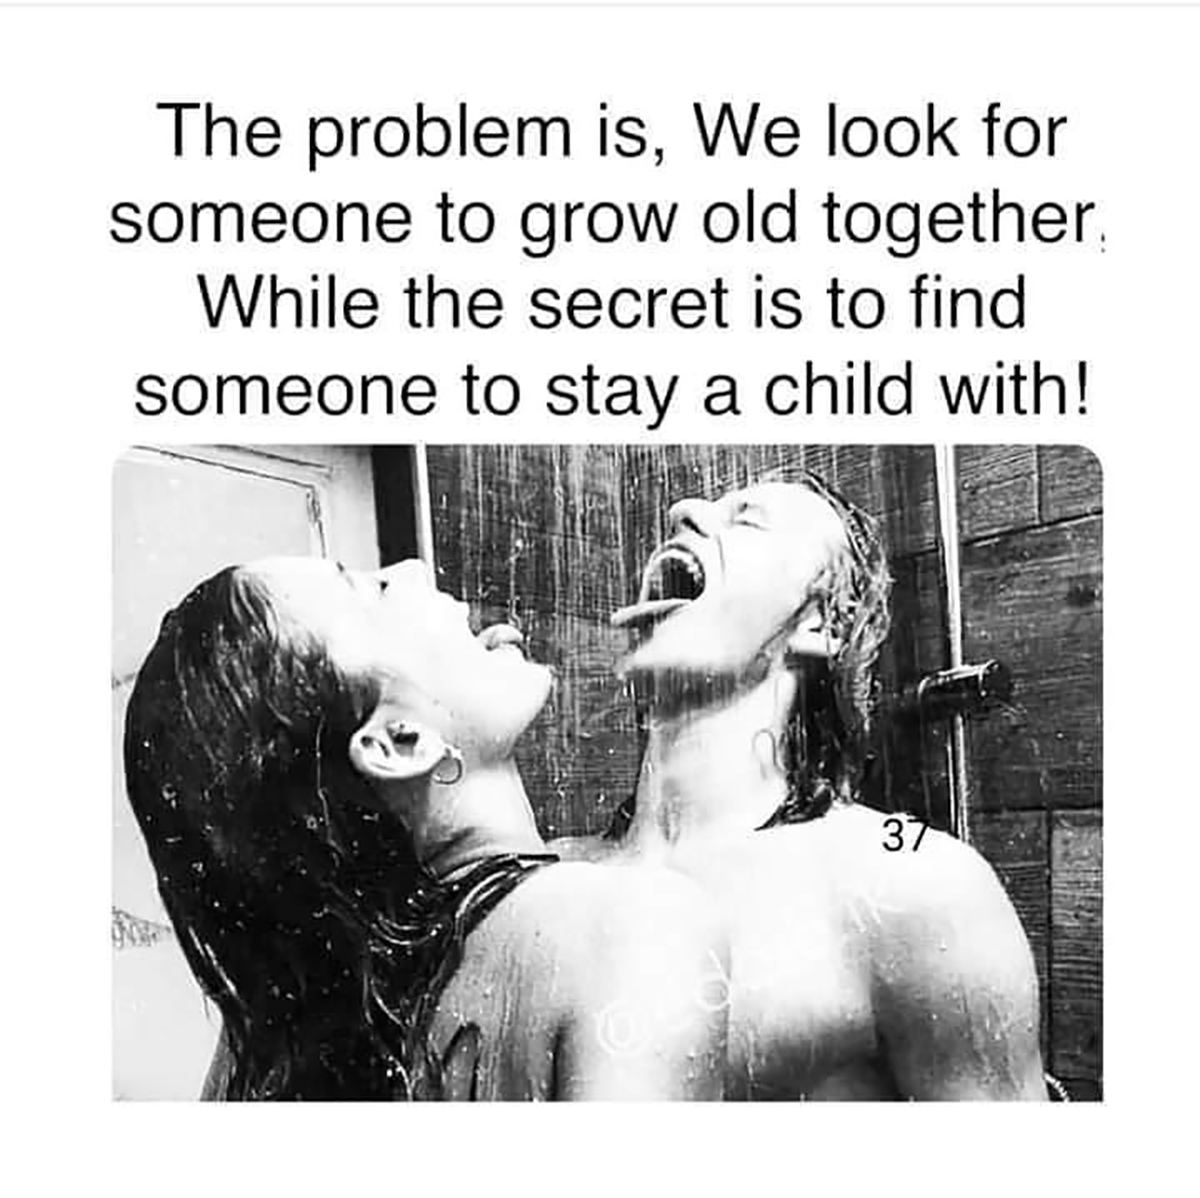 fresh memes - human behavior - The problem is, We look for someone to grow old together. While the secret is to find someone to stay a child with! 37